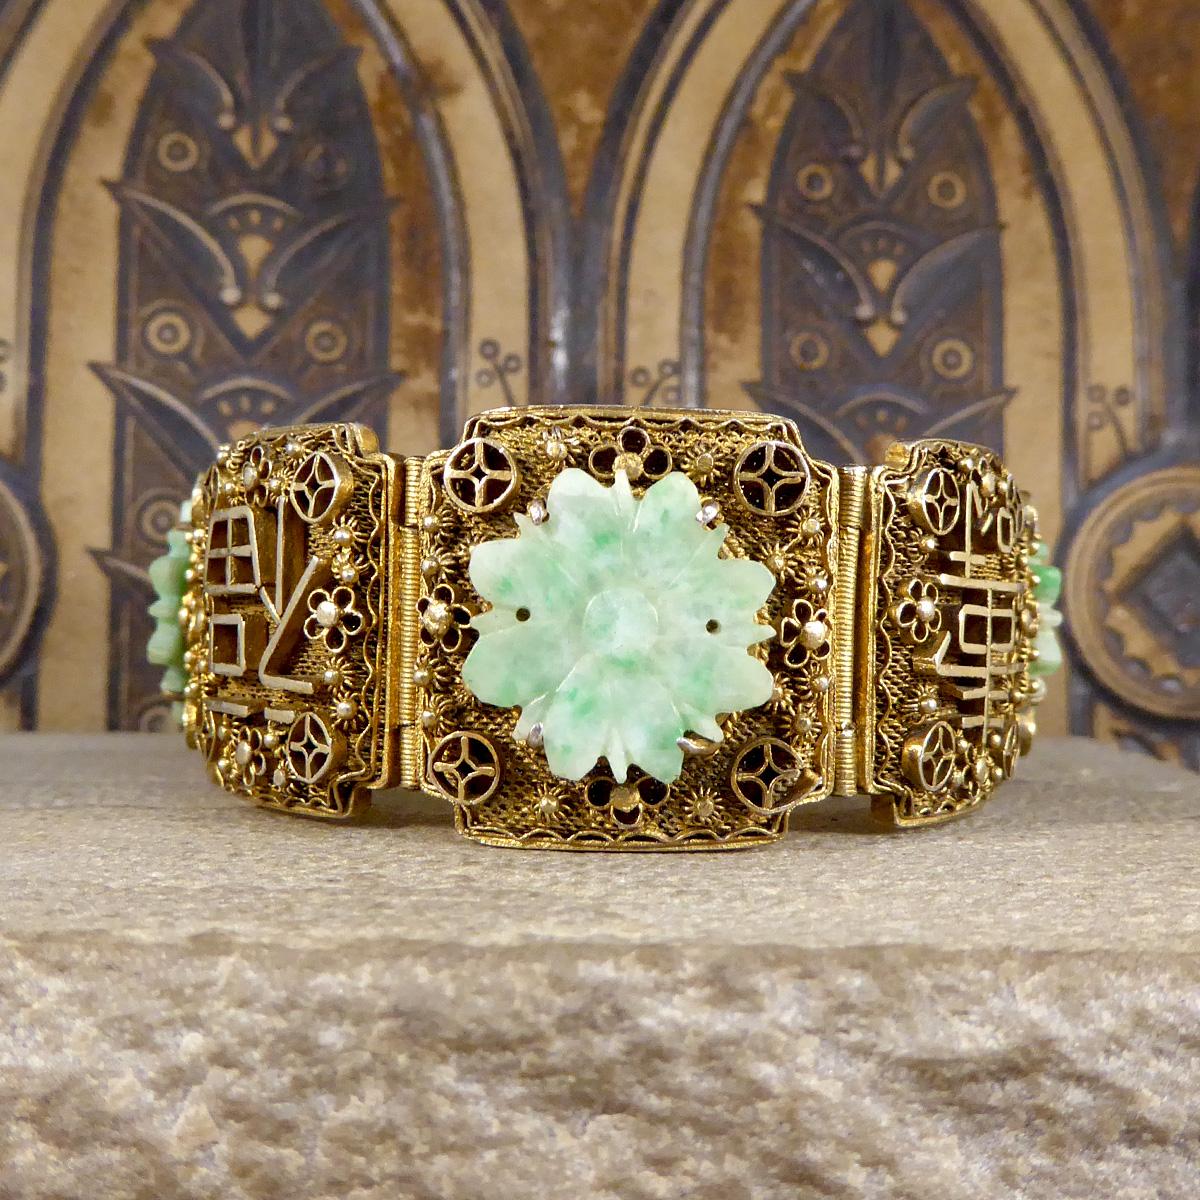 This gorgeous vintage bracelet features 7 panels of Gold Plated Chinese Silver with floral details that delicately decorate each panel. Starting with the first panel adorned and fixed with a carved Jadeites in a flower pattern, leading to the next